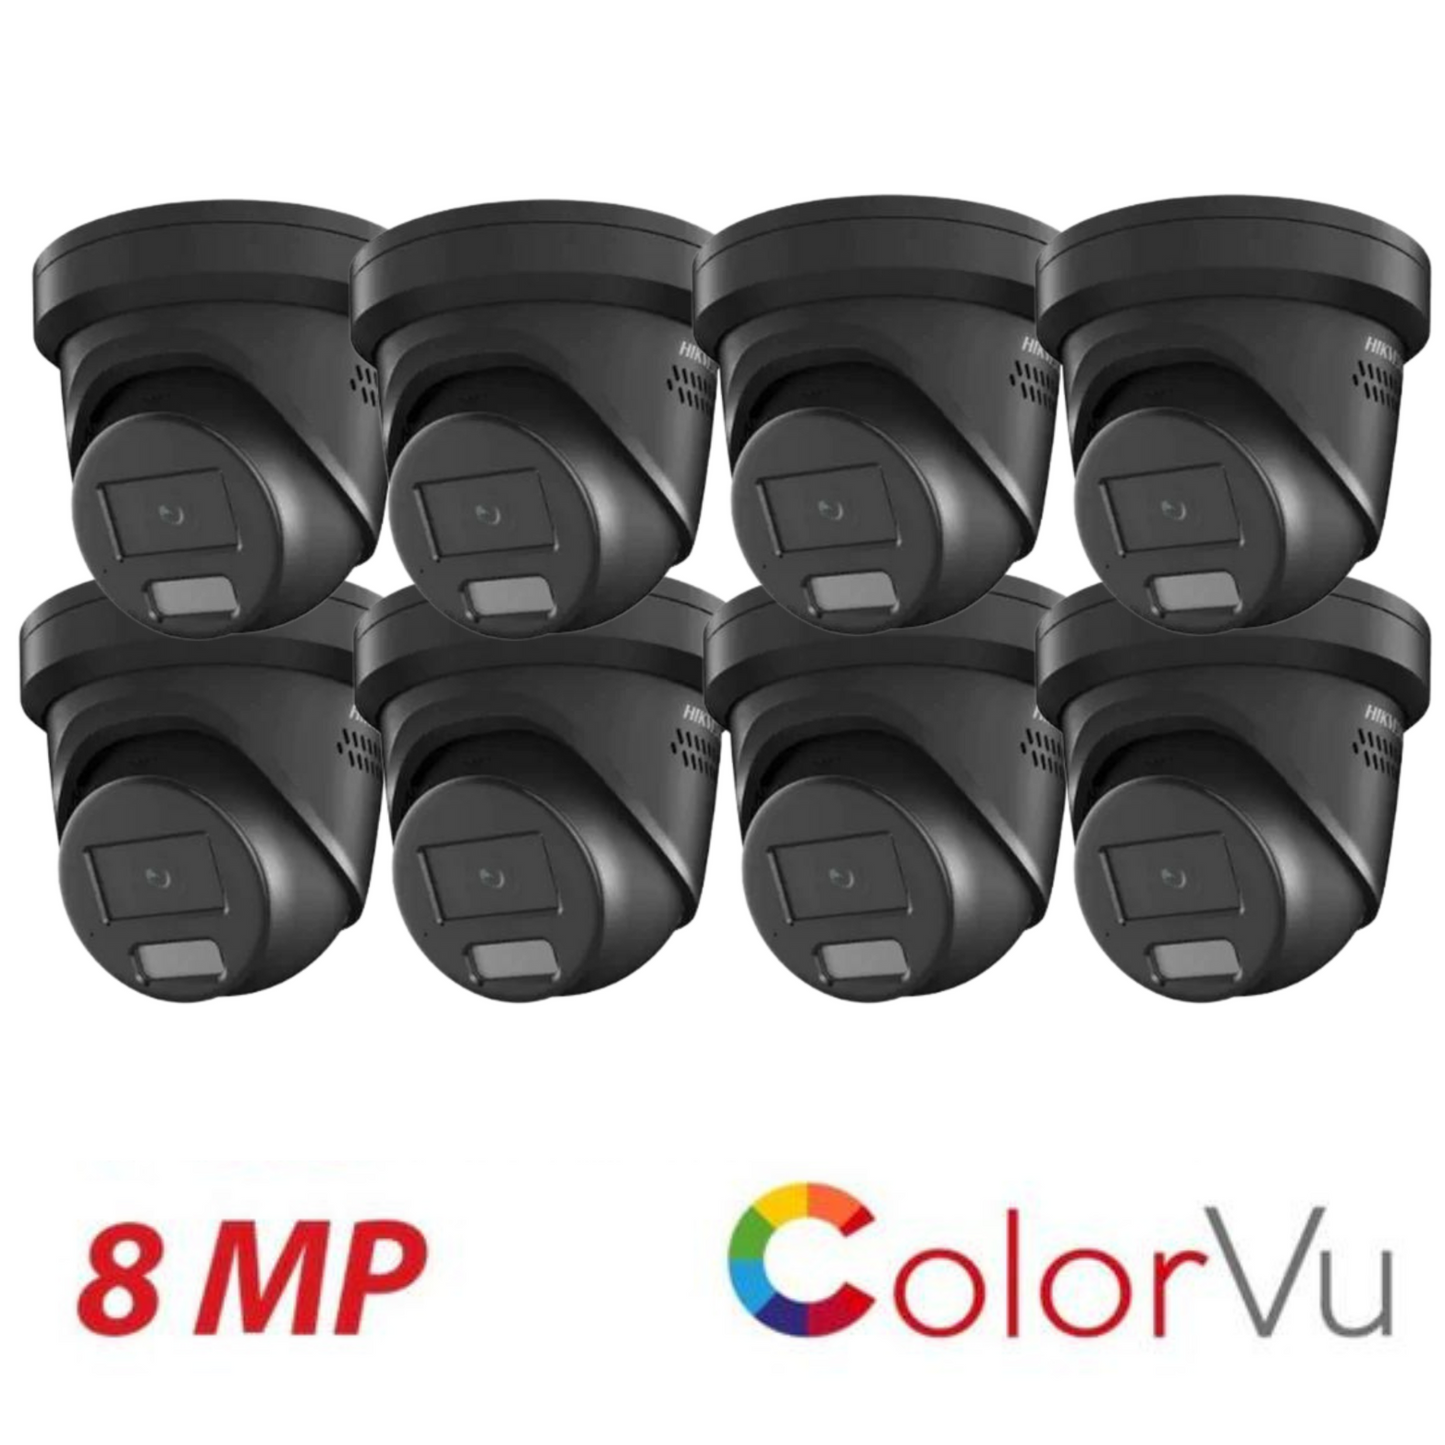 8 x 8MP Hikvision 2.8mm Smart Hybrid ColorVu AcuSense Fixed Turret IP Network Camera Built-in Mic DS-2CD2387G2H-LIU(2.8MM)(EF)